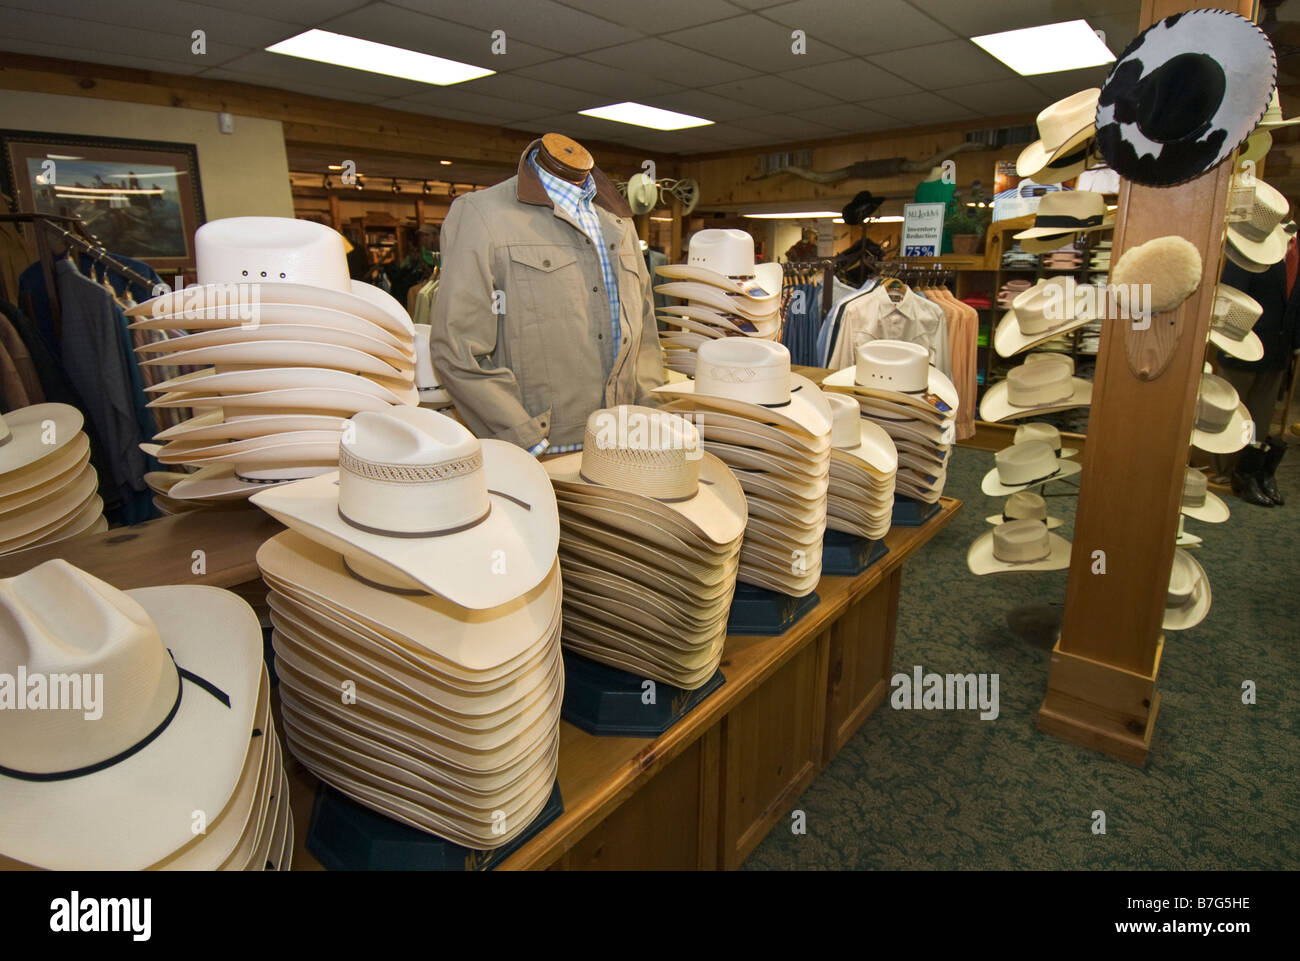 Texas Fort Worth Stockyards National Historic District M L Leddy western  wear store cowboy hats Stock Photo - Alamy